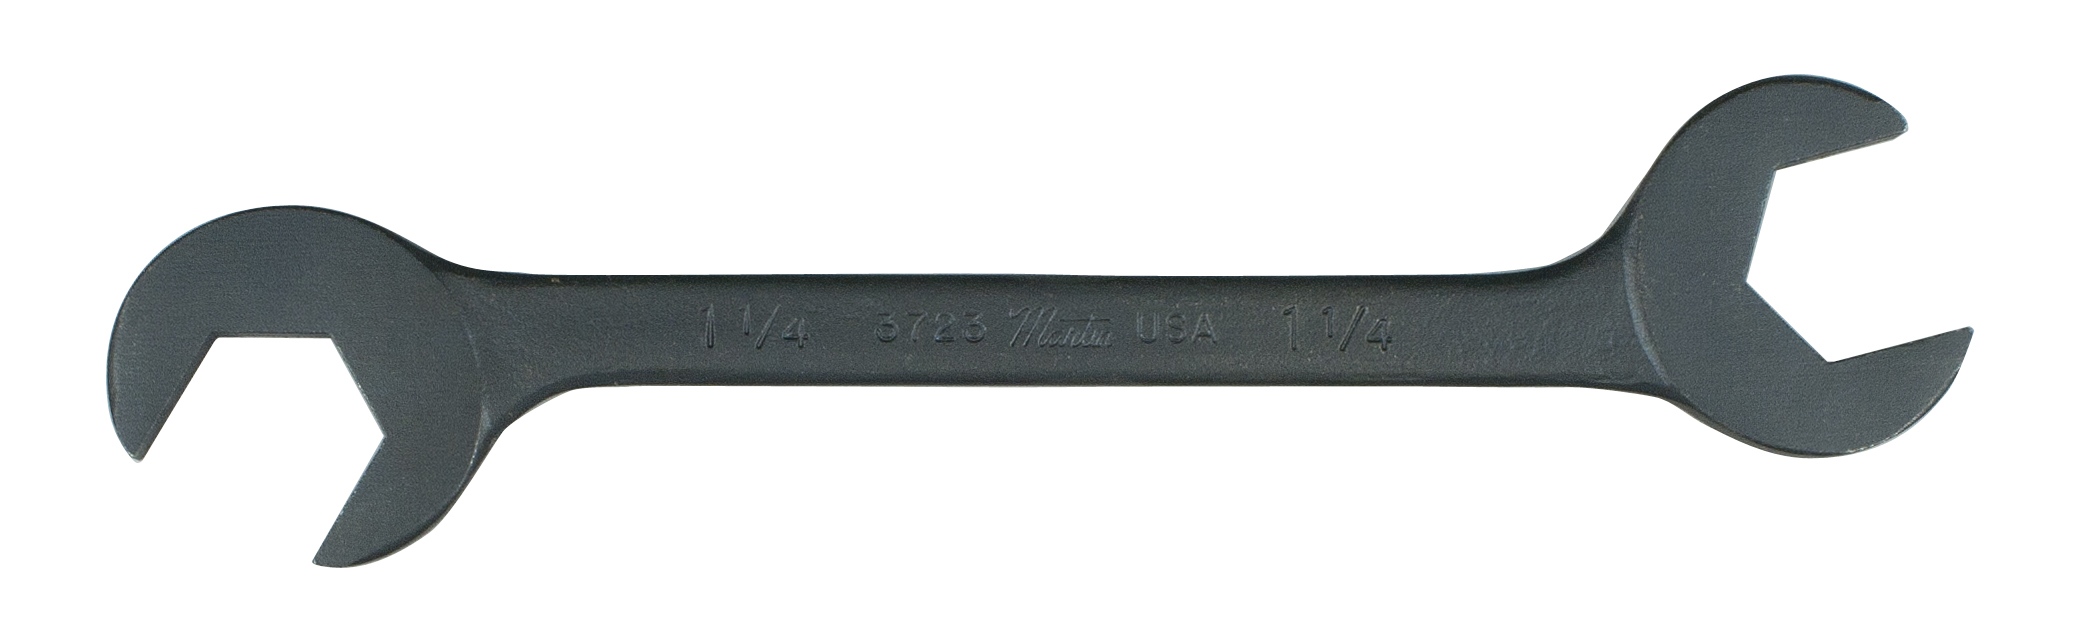 11/16" Black Angle Wrench